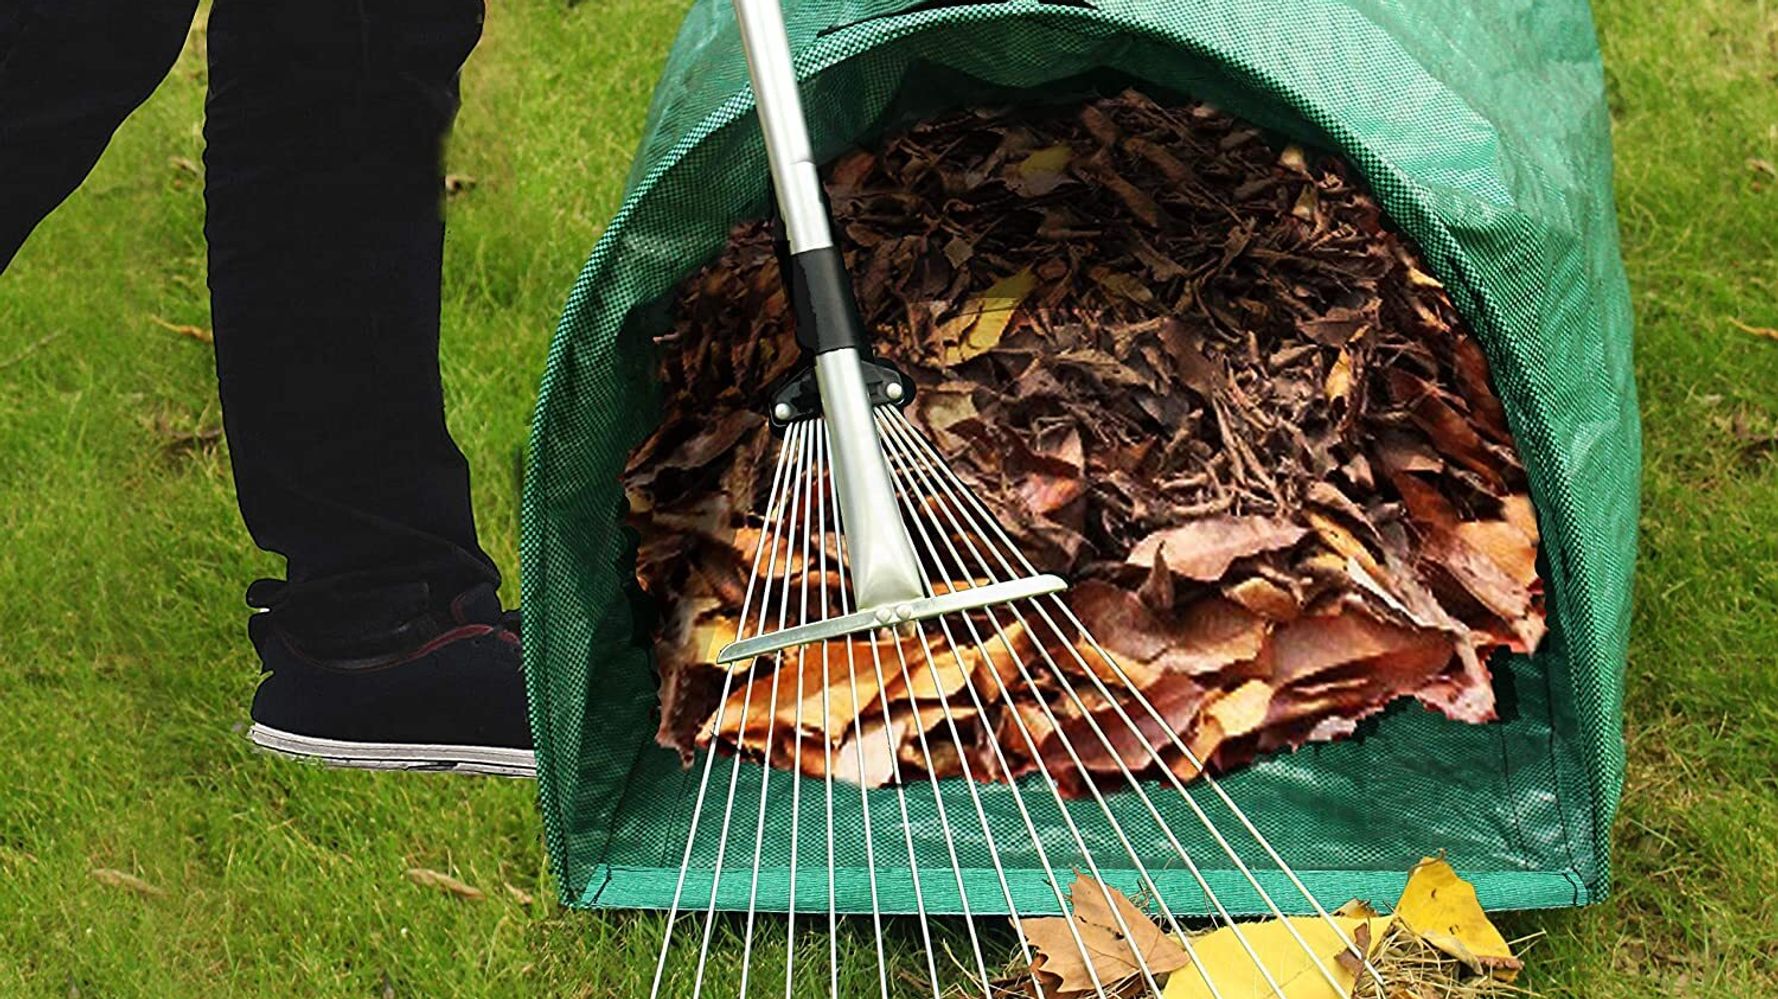 16 Products To Help You Clean Up Your Yard